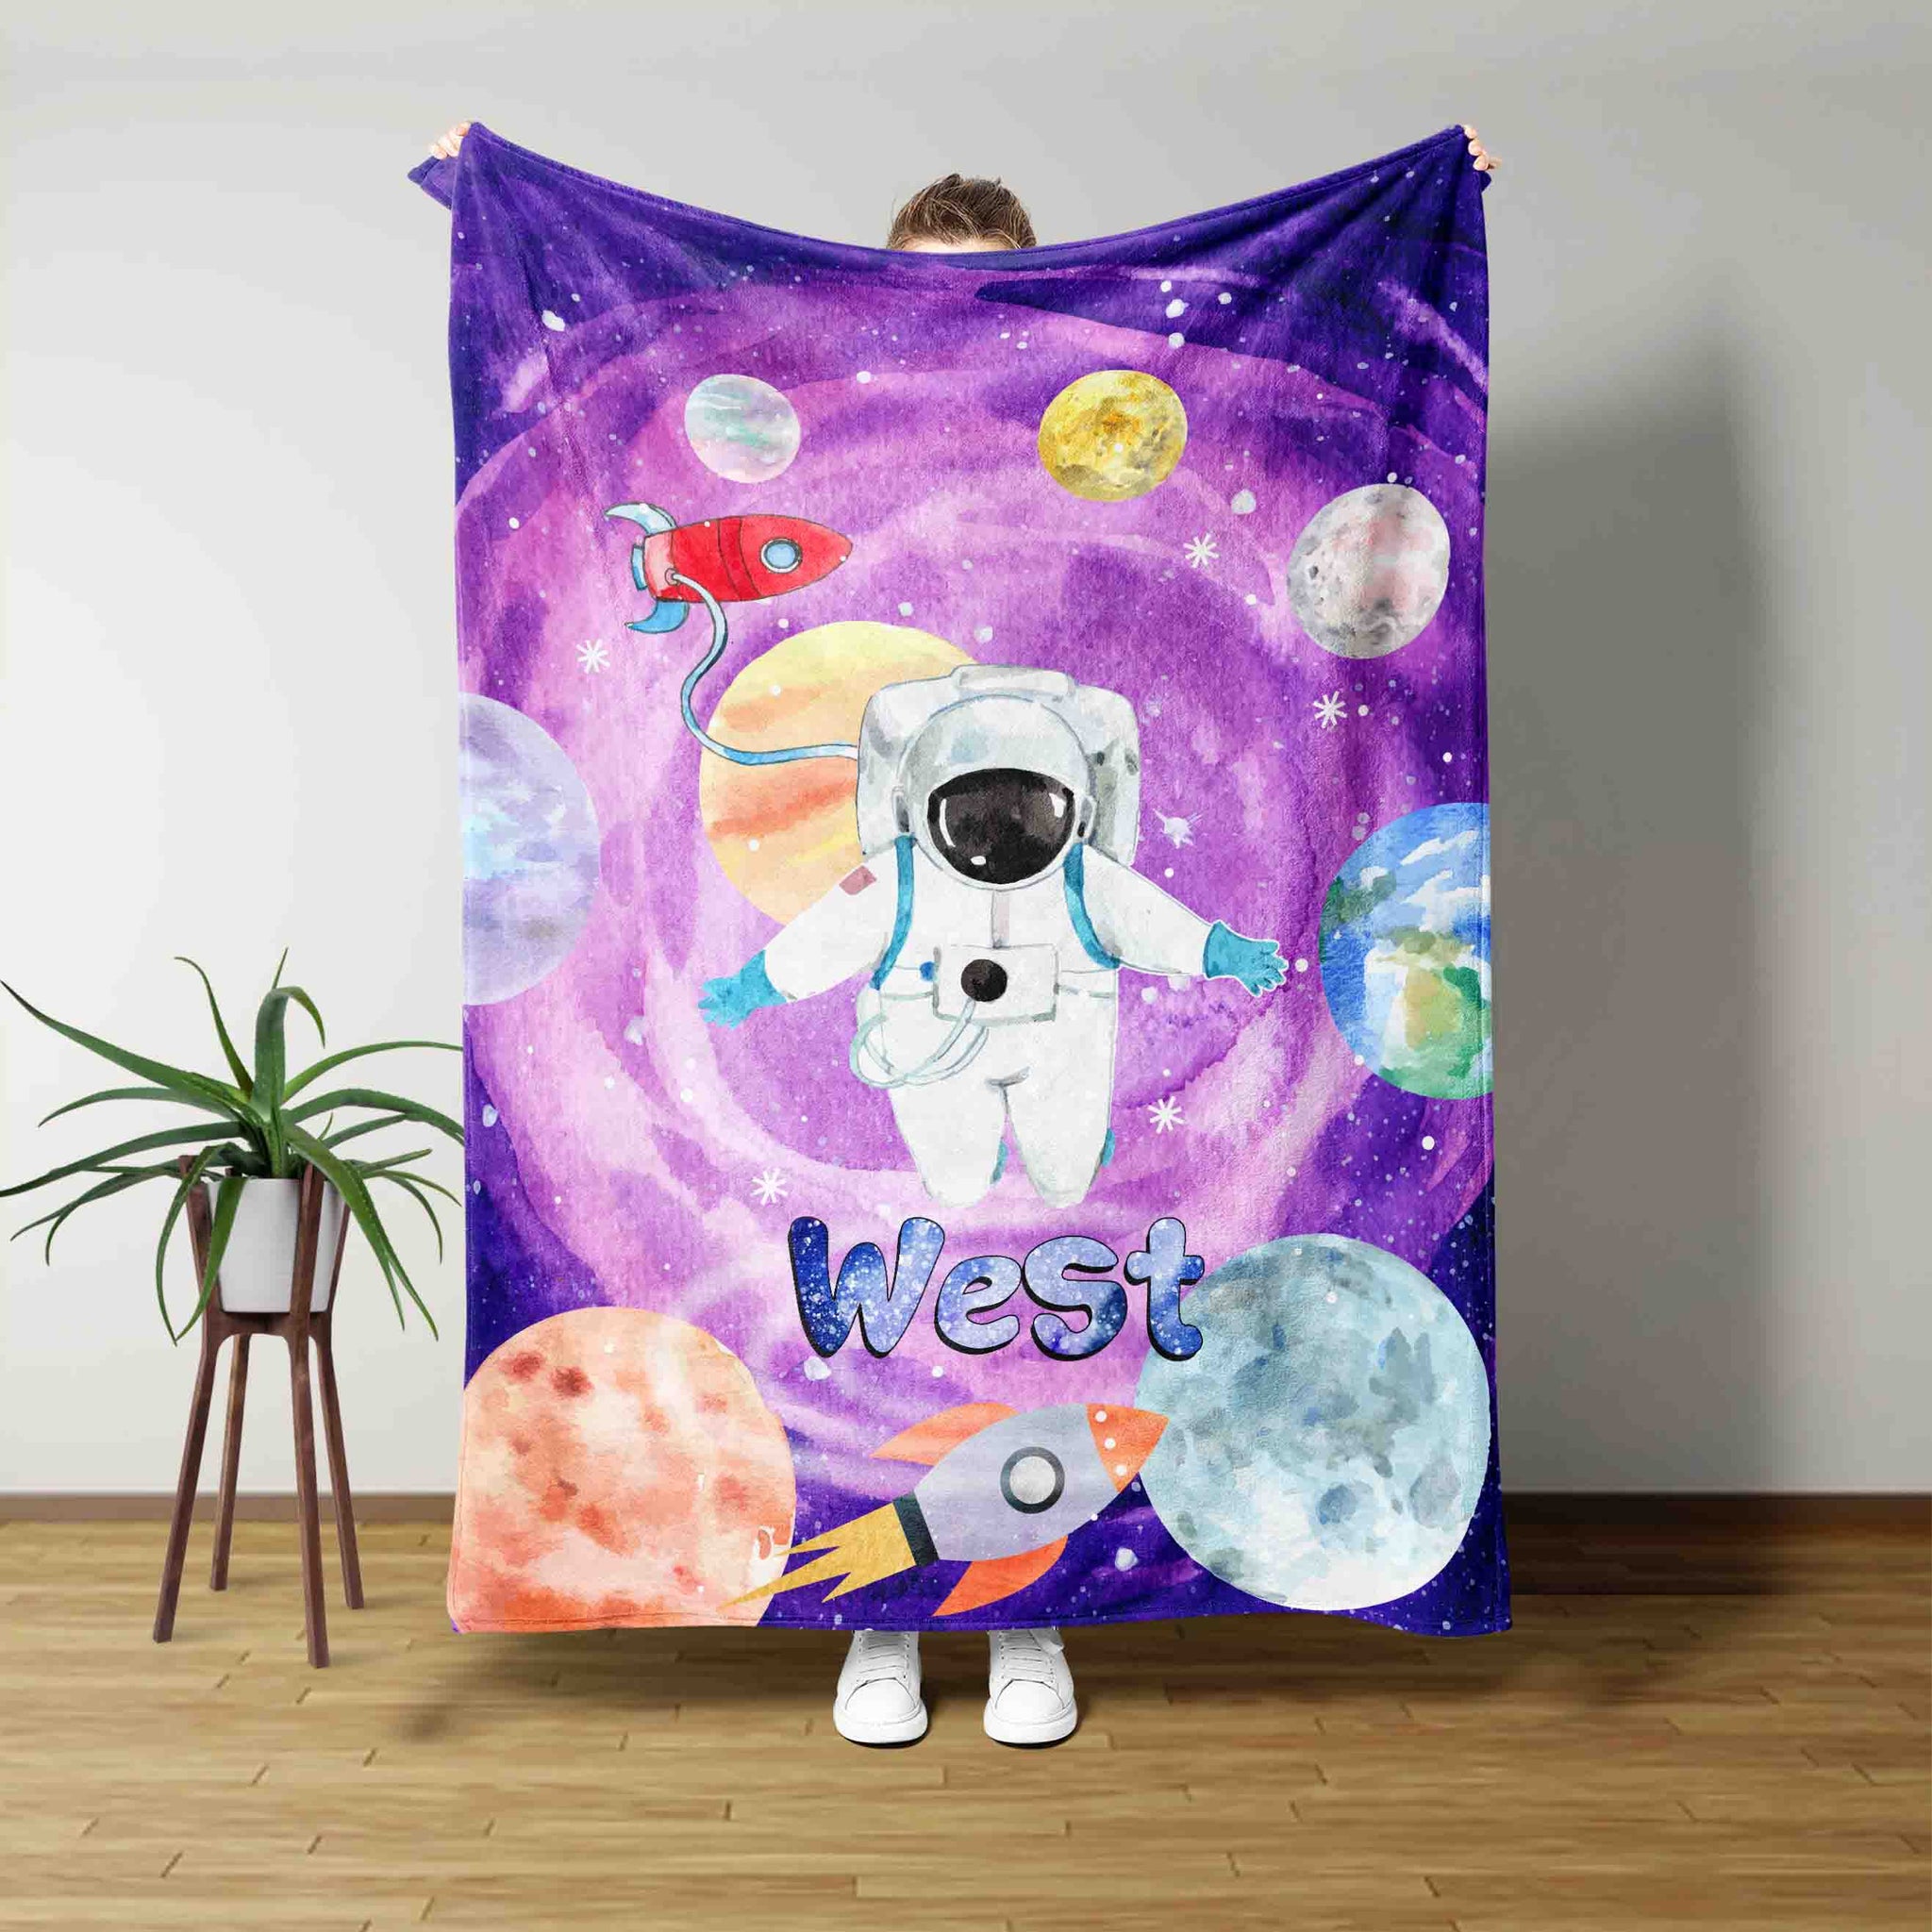 Personalized Name Blanket, Astronaut Blanket, Outer Space Blanket, Planet Astronaut Blanket, Planet Blanket, Baby Blanket, Best Gift Blanket